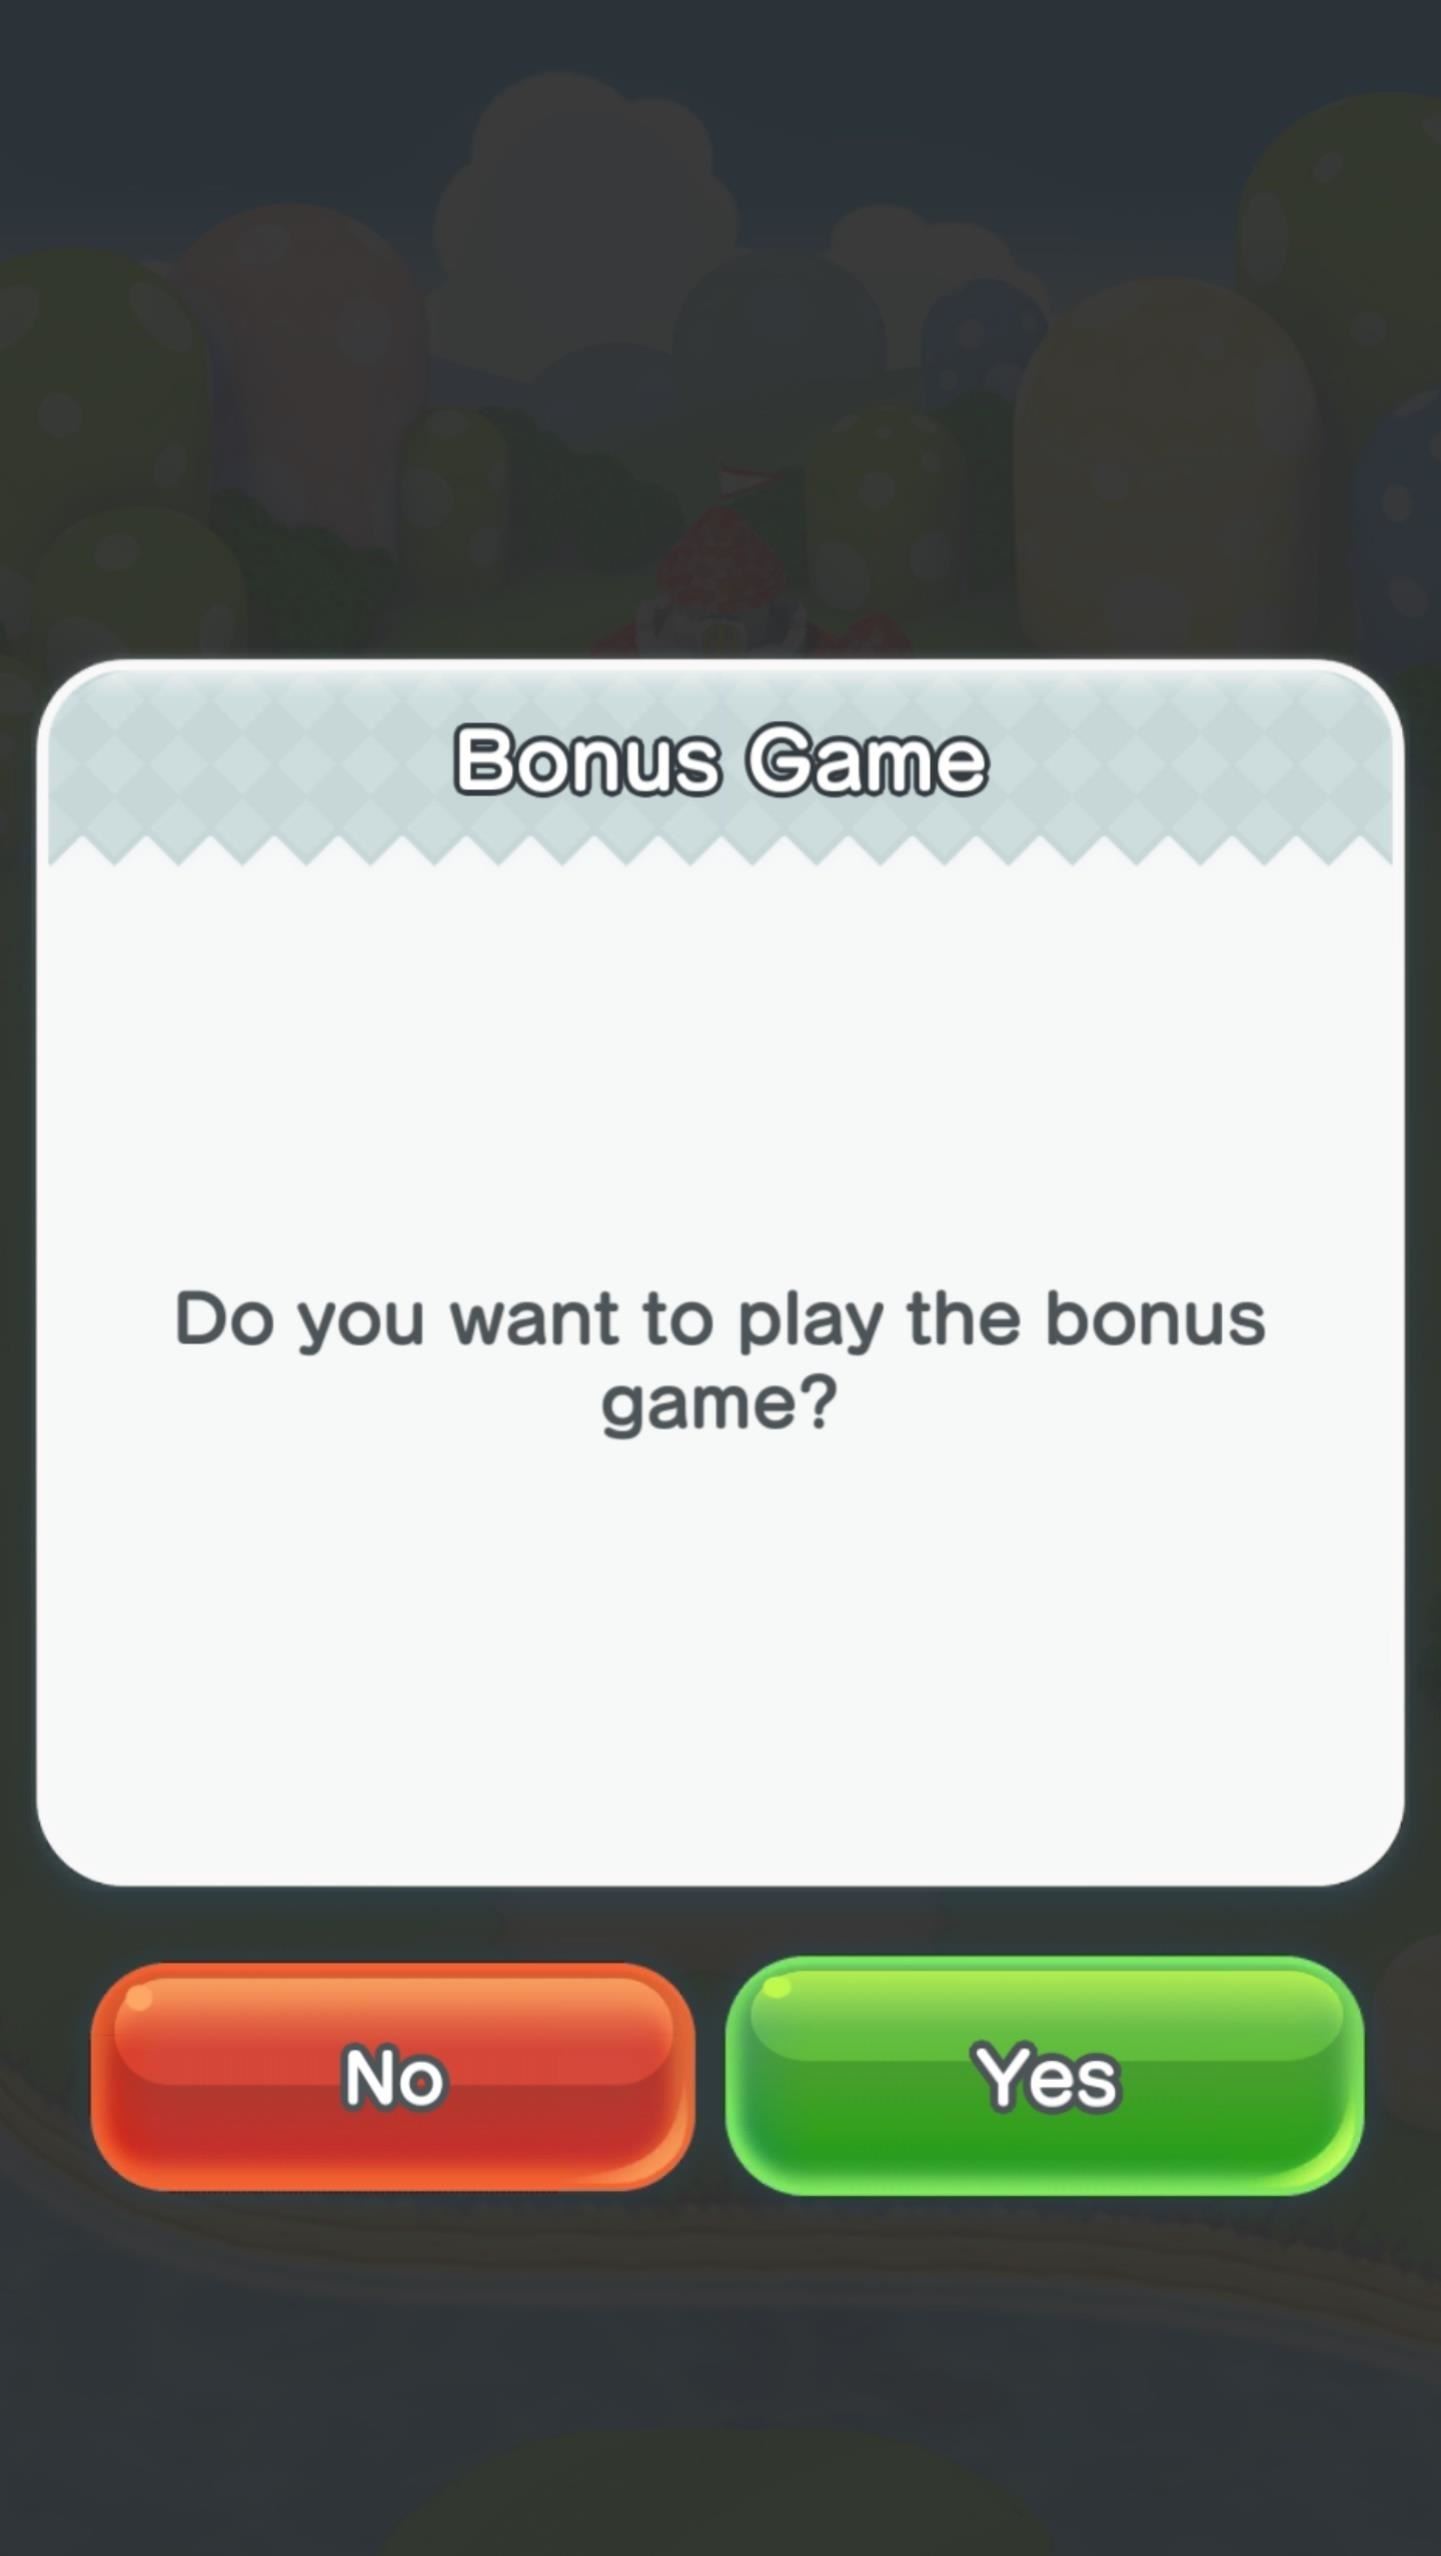 Super Mario Run 101: How to Earn More Toad Rally Tickets